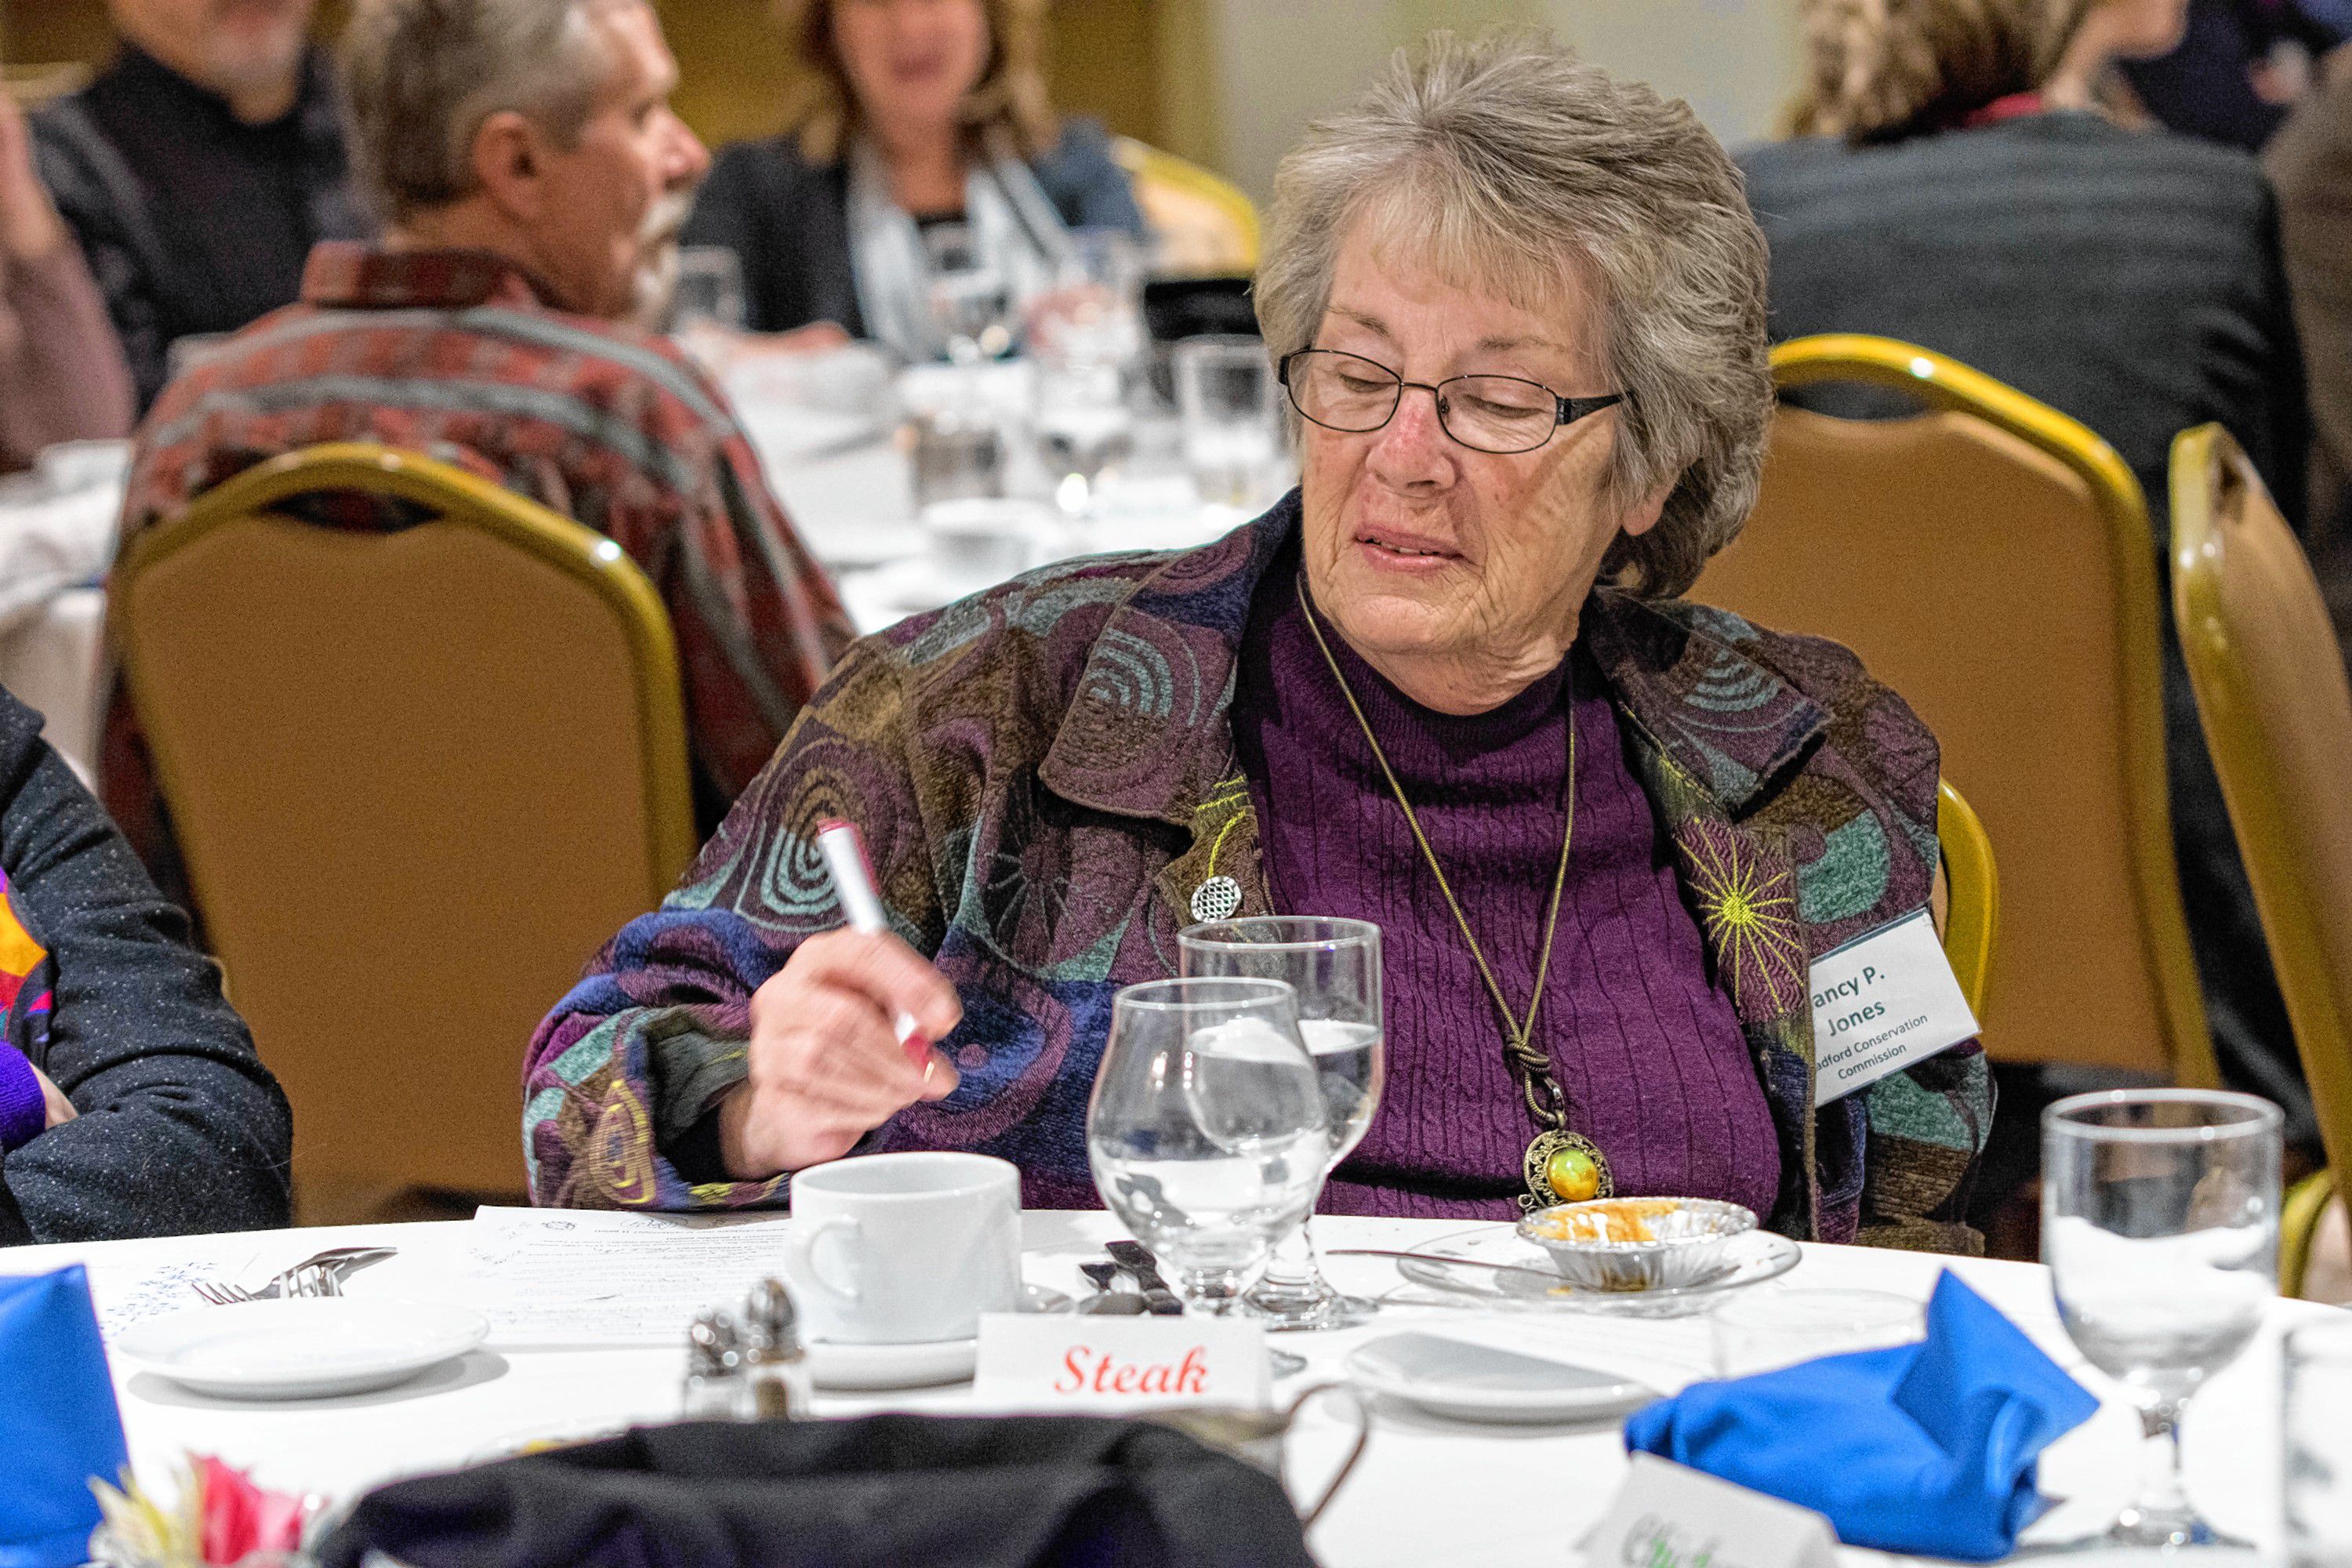 Cohase Chamber of Commerece member Nancy P. Jones, of the Bradford, Vt., Conservation Commission, looks over her answers to the trivia game during the chamber's annual meeting, held Jan. 23 at the Lake Morey Resort in Fairlee. (Nancy Nutile-McMenemy photograph, www.photosbynanci.com)